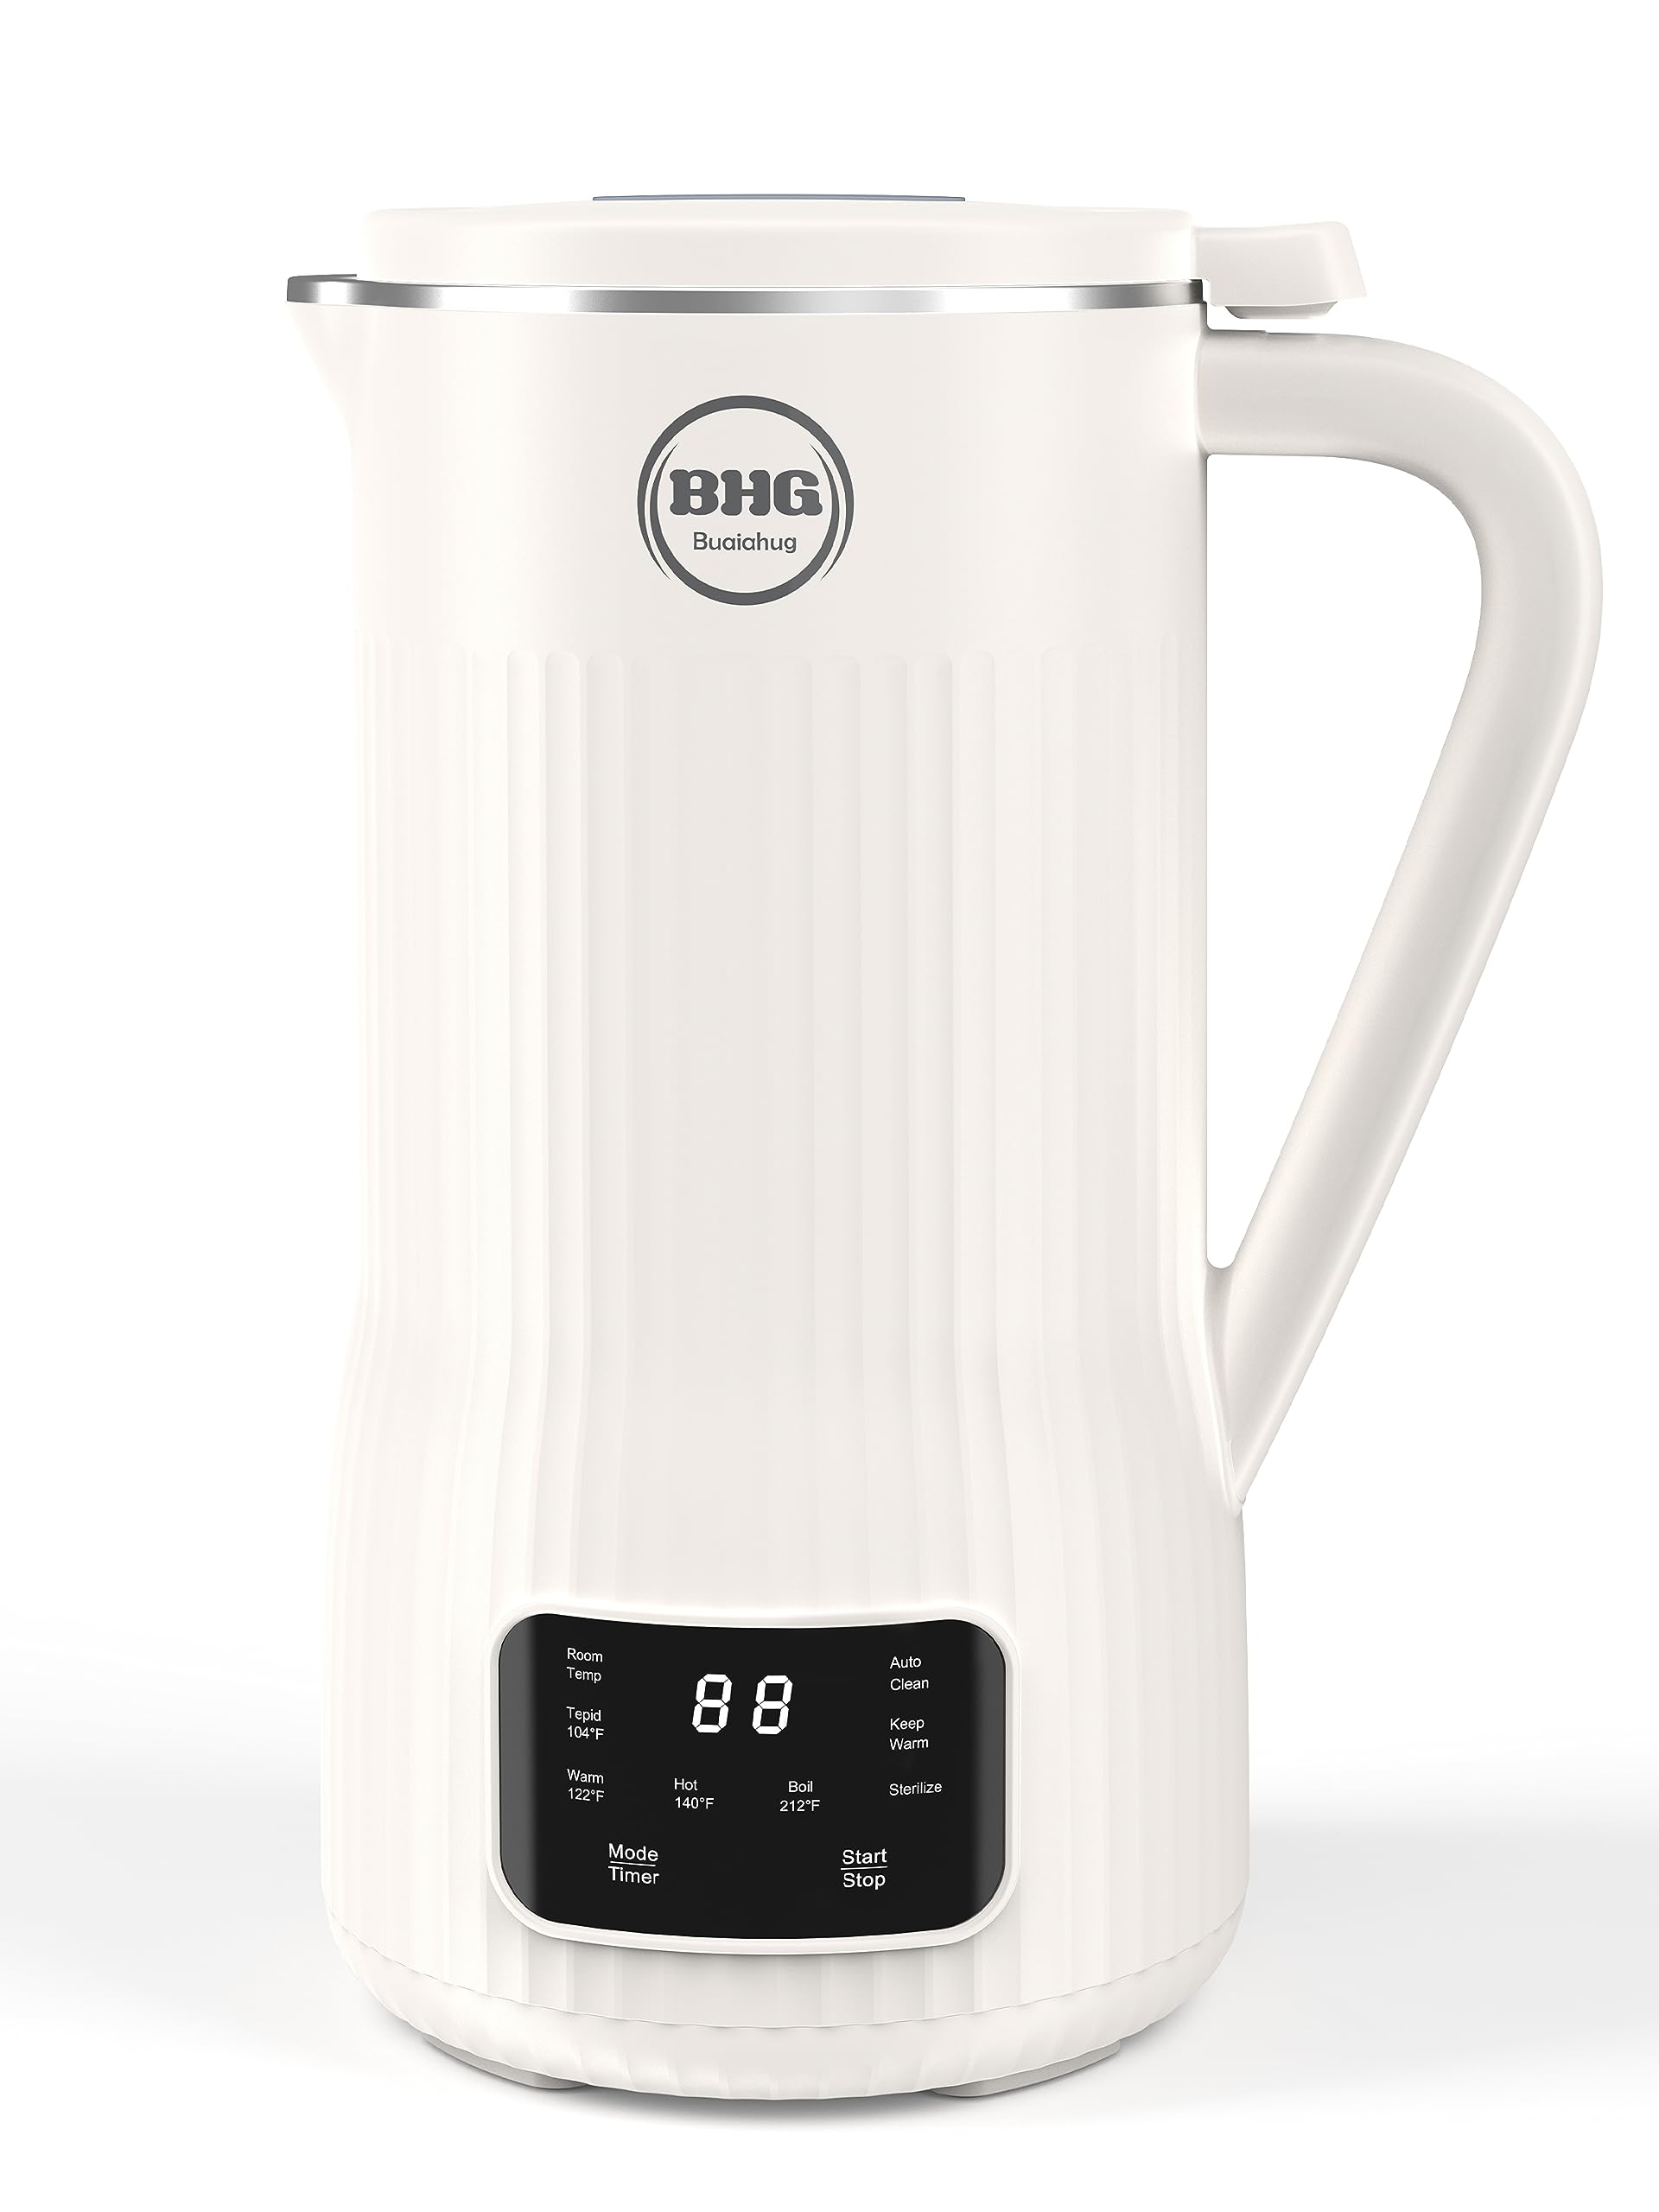 A white electric kettle with a clock on it.